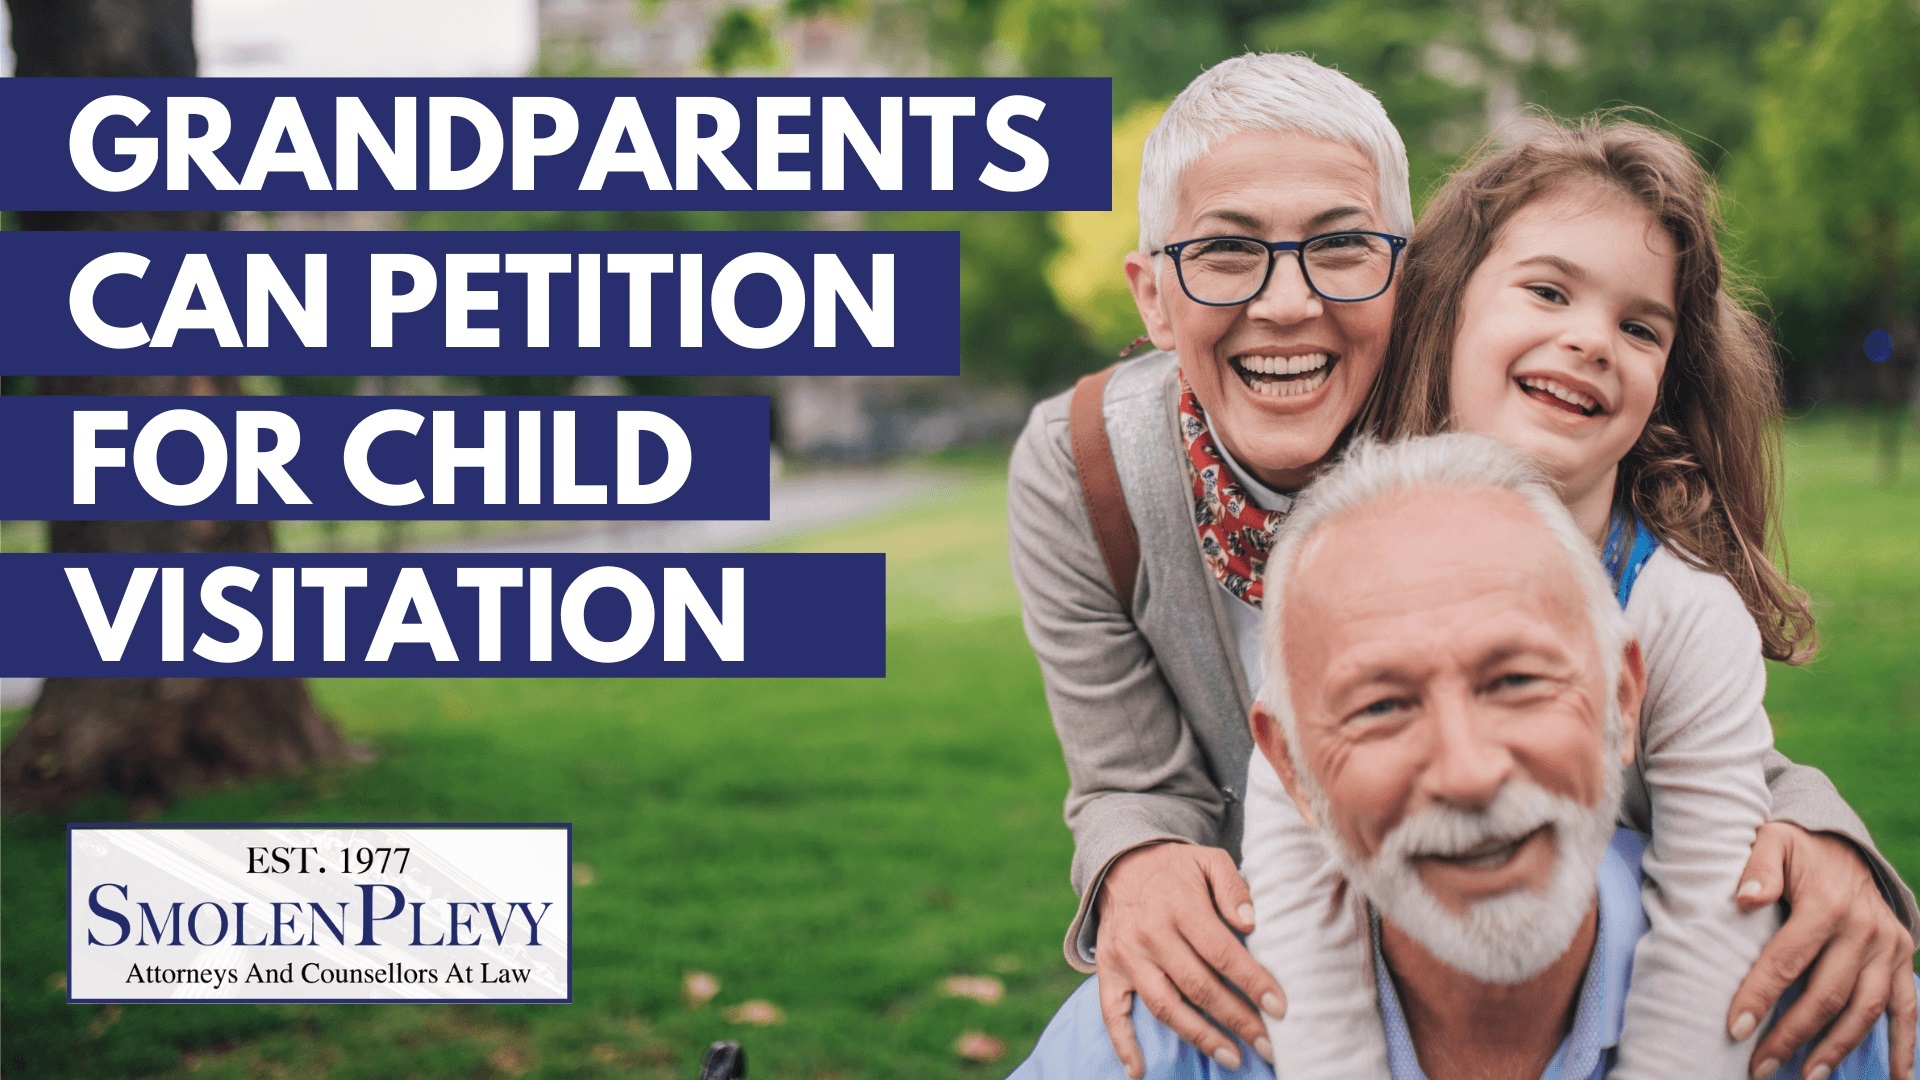 Grandparents and Siblings Can Petition for Child Visitation in Virginia